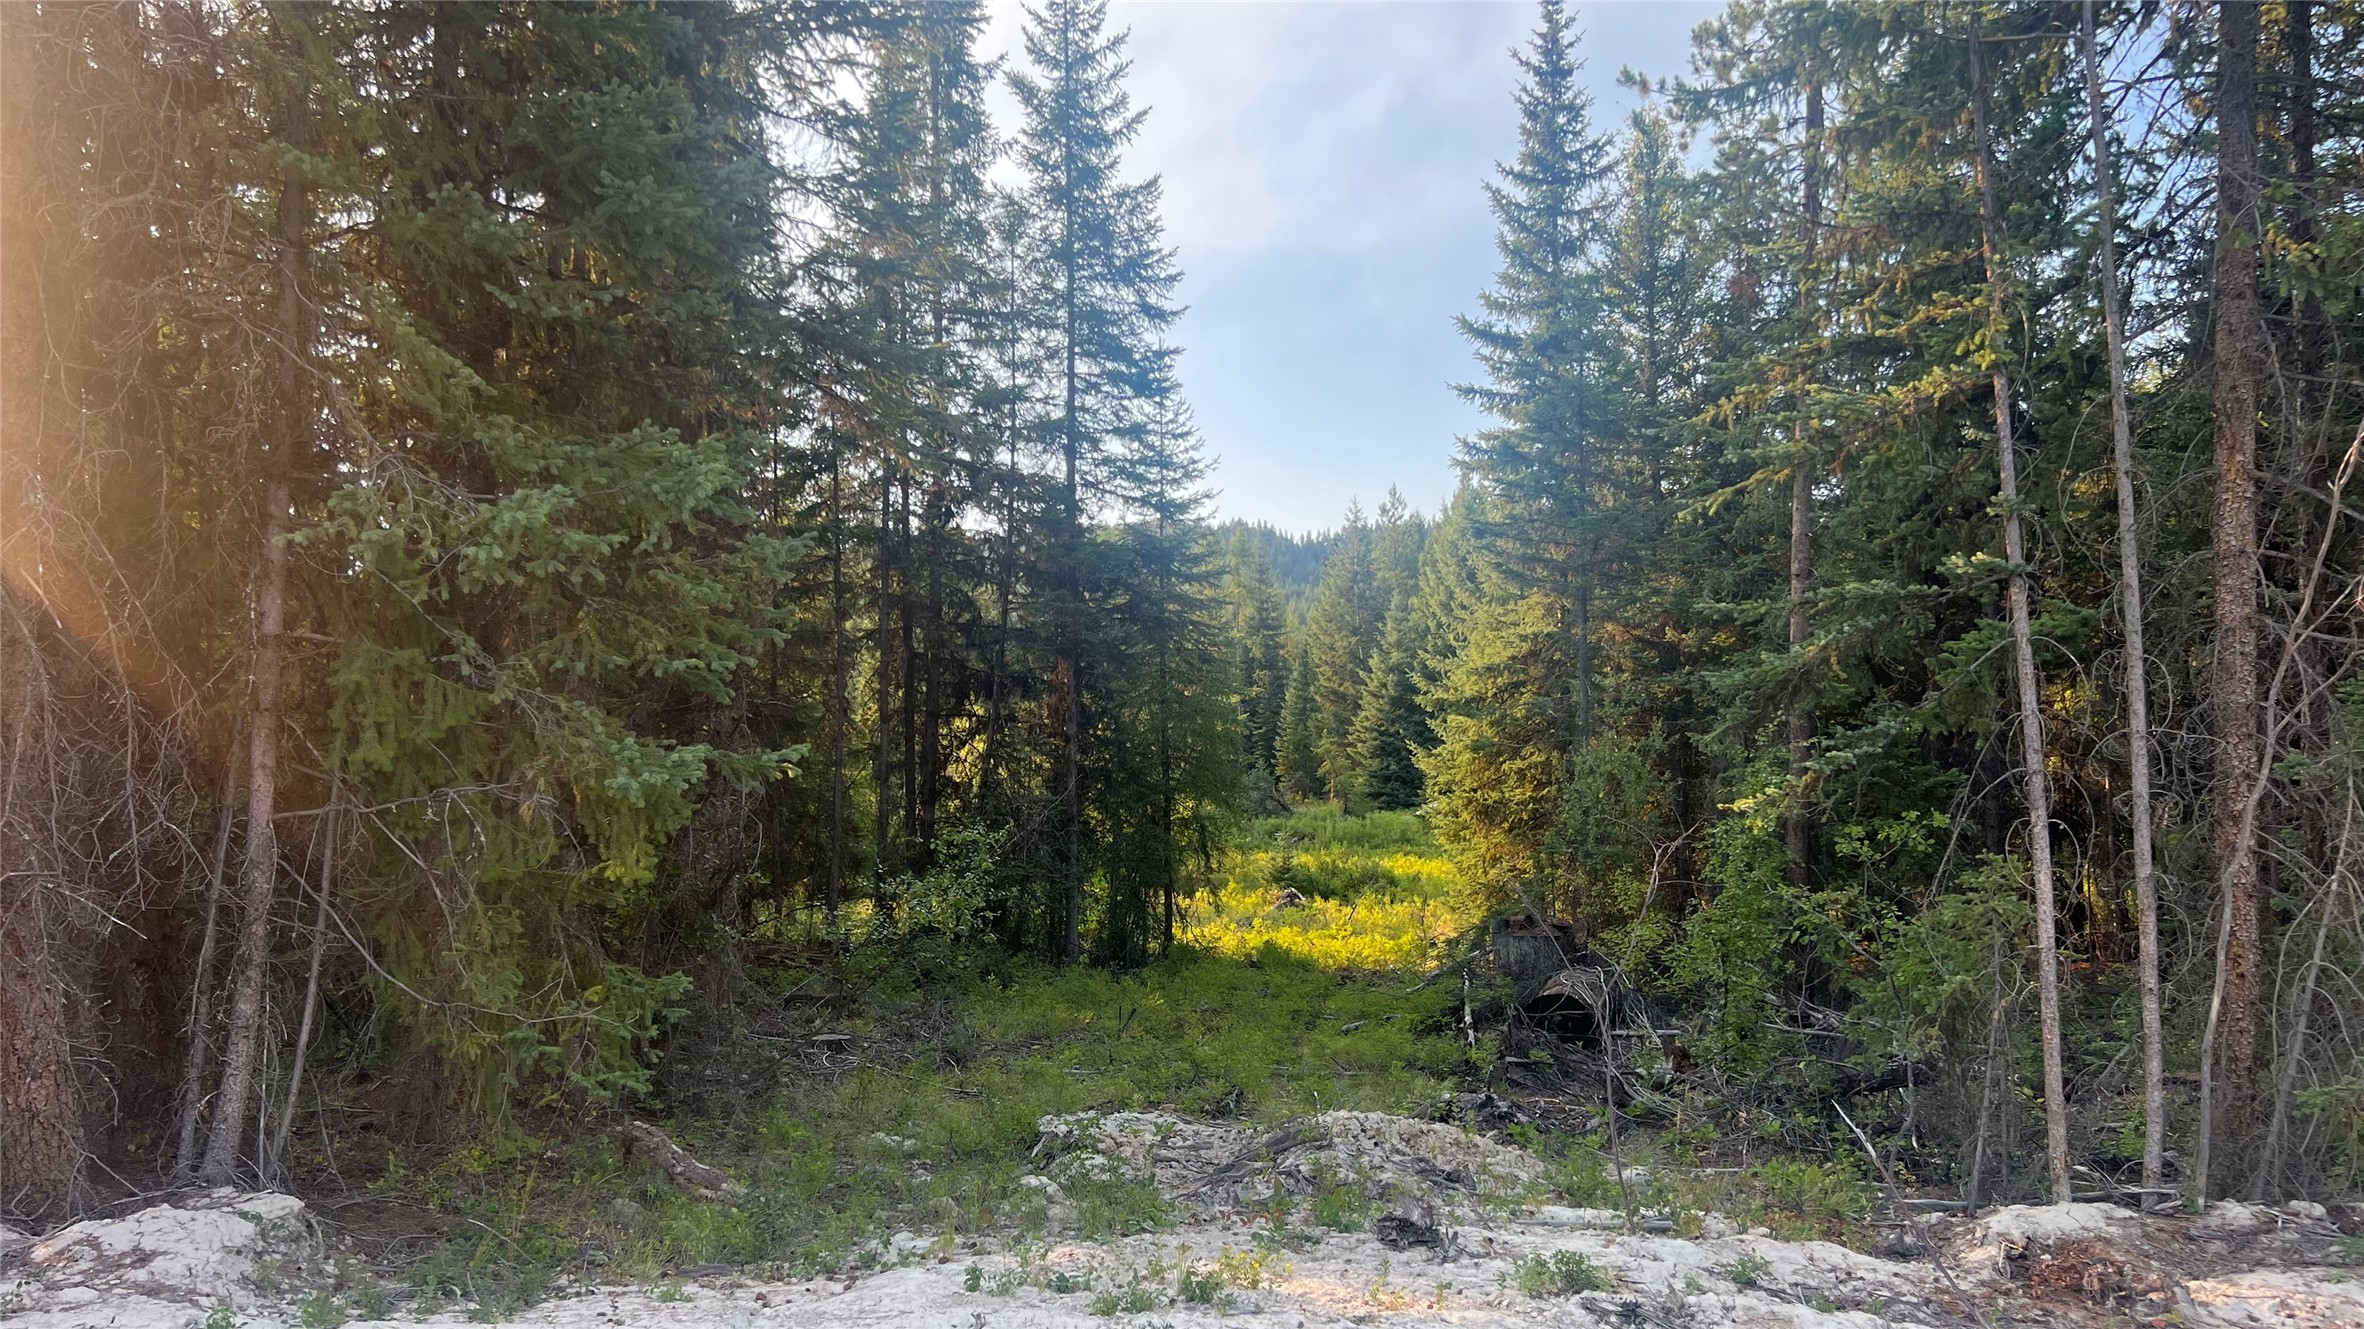 This 20.17 acre lot is located within close proximity to Happy's Inn and halfway between Libby and Kalispell MT. Whether your building your dream home or starting a small homestead this property will meet your needs and has endless potential. Within a short proximity are the Thompson Chain of lakes, lakes, streams and rivers. The year long recreational opportunities in the area are countless. Phone and power are installed. Take a drive and visit your future homesite. Call Roby Bowe at 406-293-1988 or your Real Estate Professional.